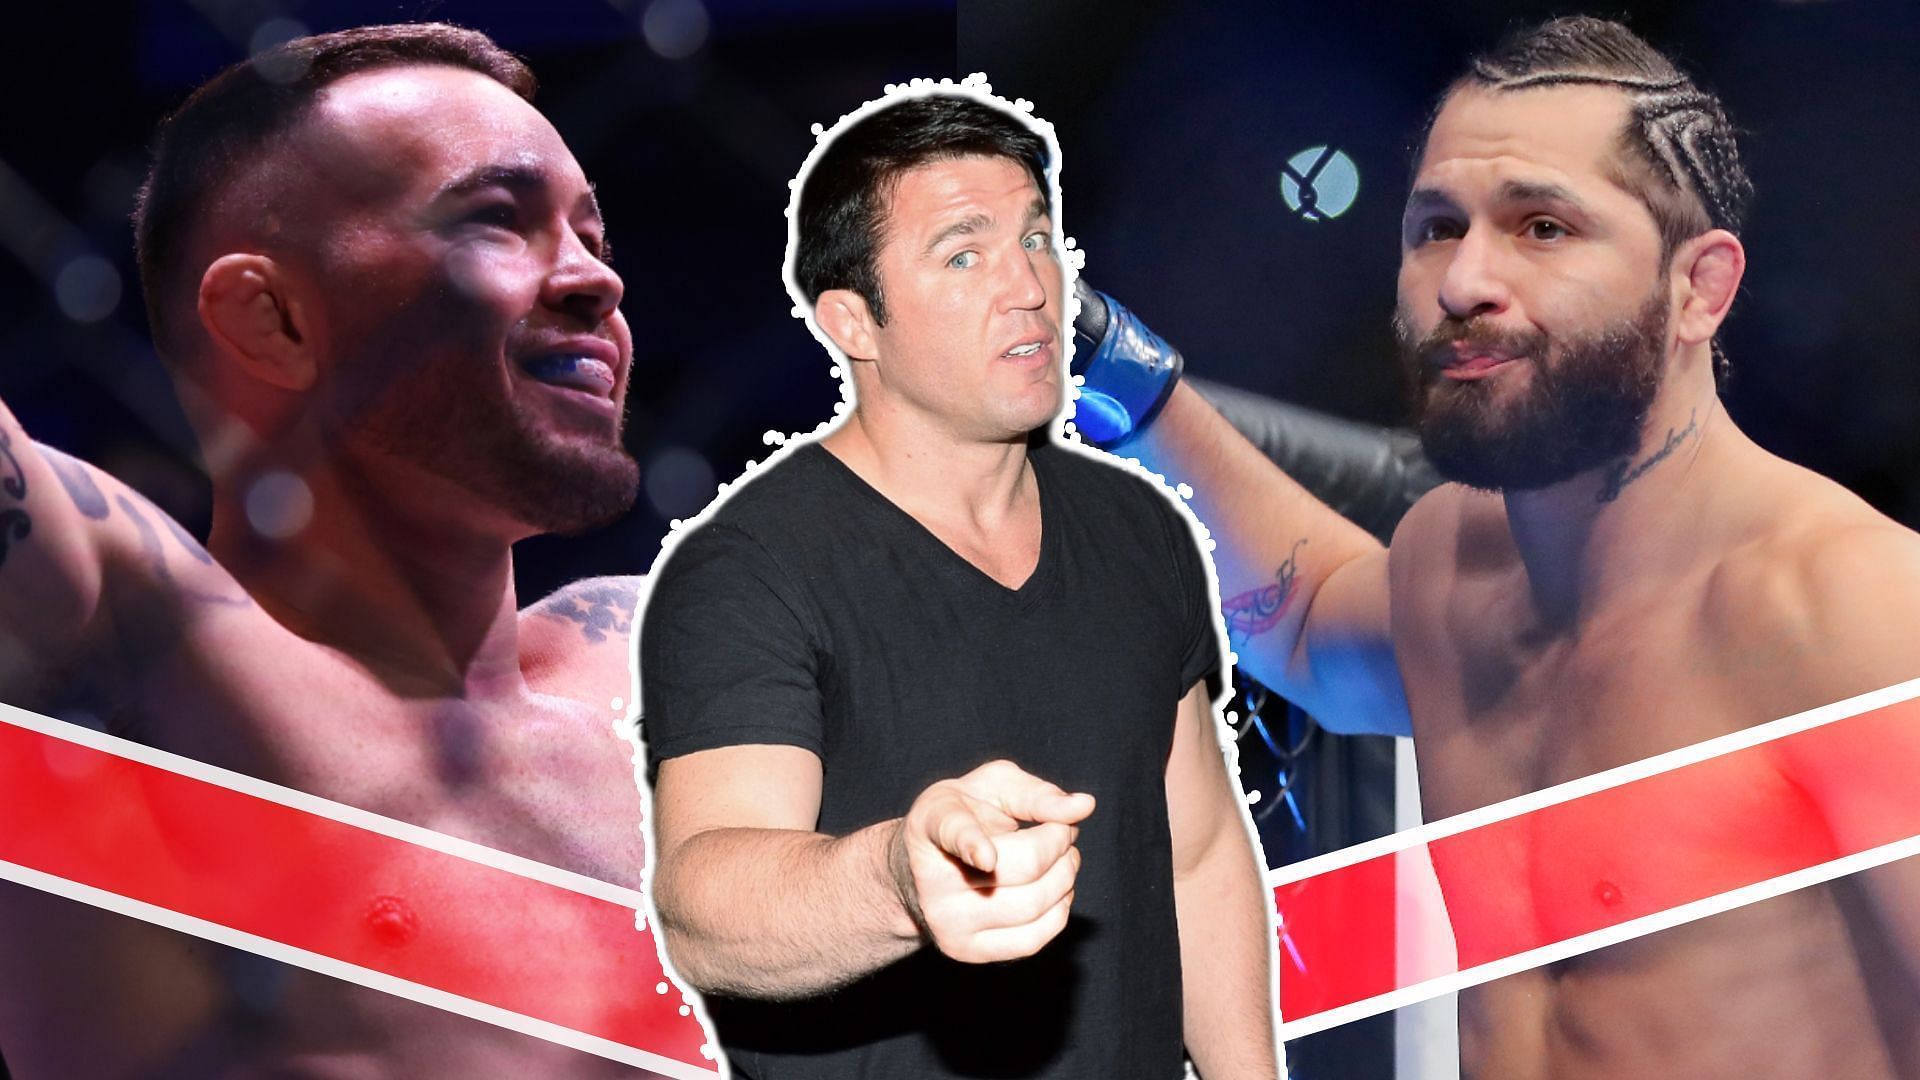 Chael Sonnen (Center) gives his prediction on Colby Covington (Left) vs. Jorge Masvidal (Right) (Images courtesy of Getty)